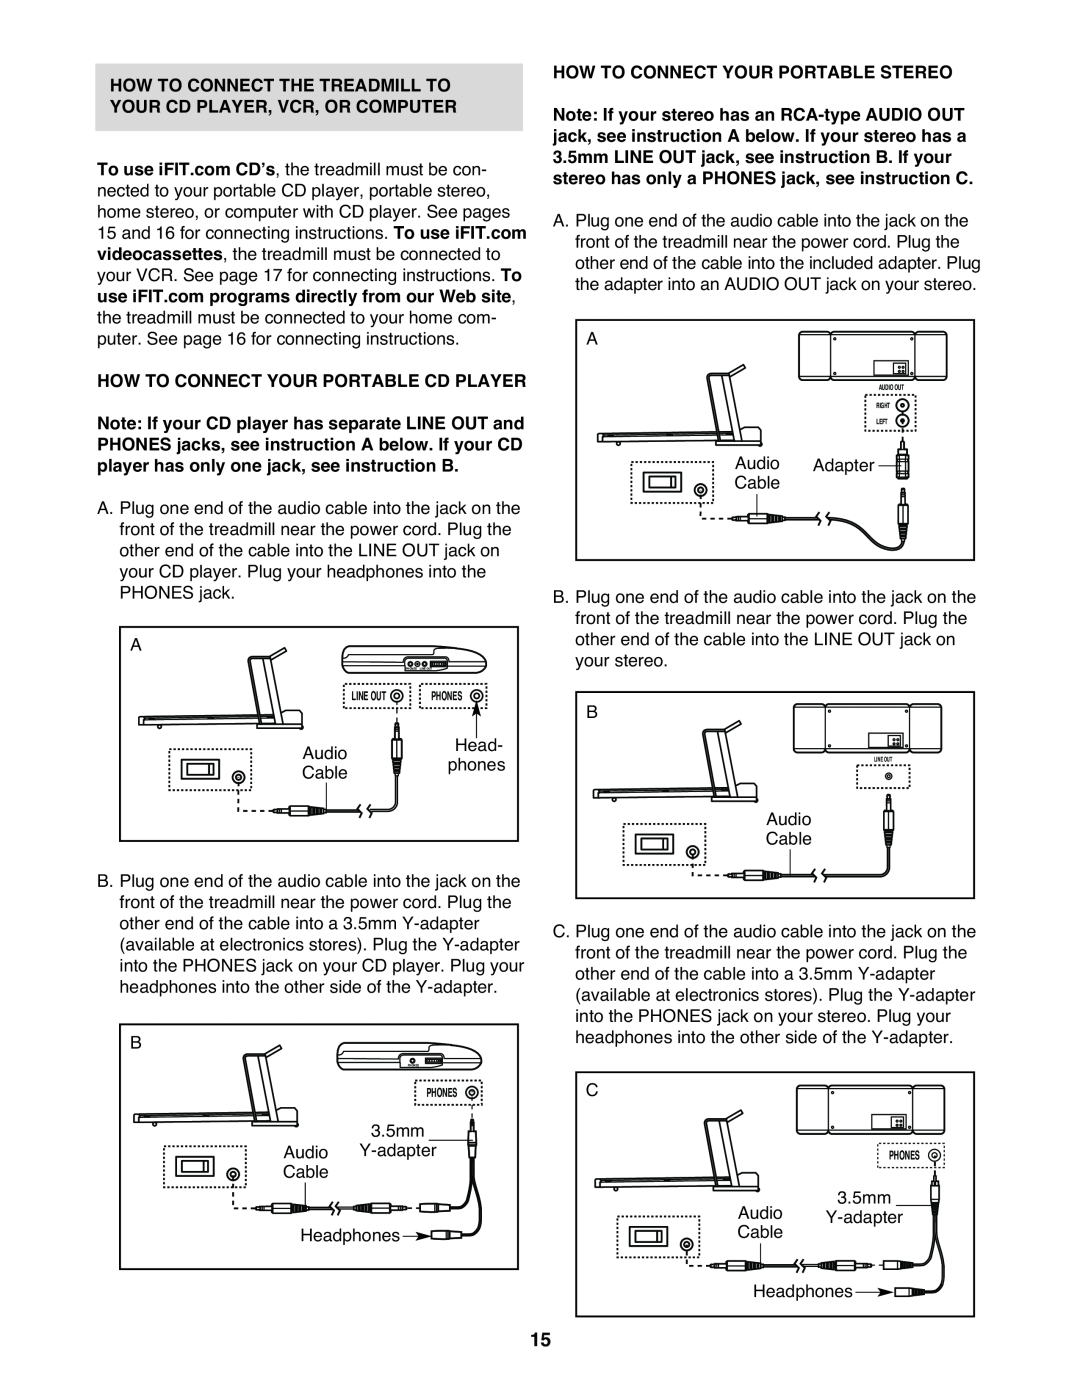 Healthrider HRT12920 How To Connect The Treadmill To Your Cd Player, Vcr, Or Computer, How To Connect Your Portable Stereo 